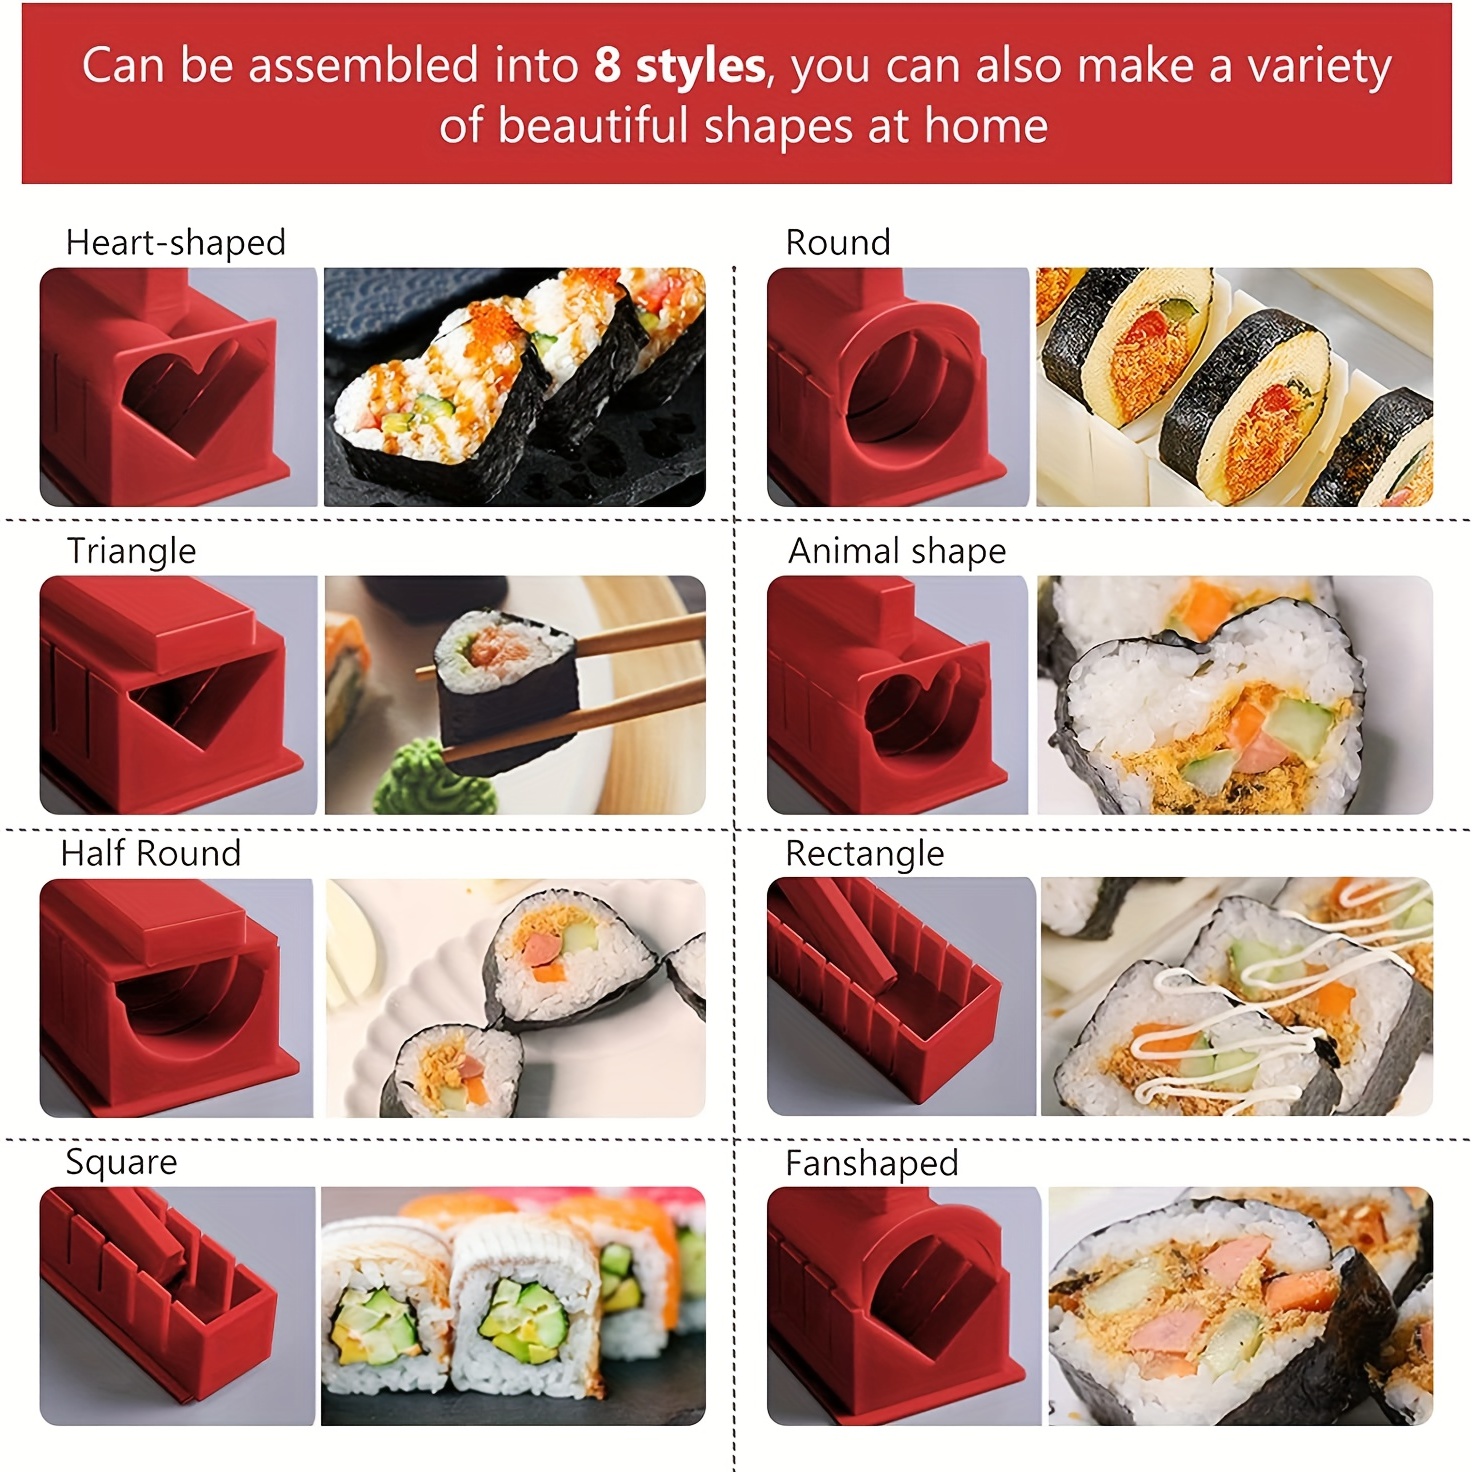 Sushi Making Kit DIY Sushi Maker with 4 Shapes Rice Roll Mold